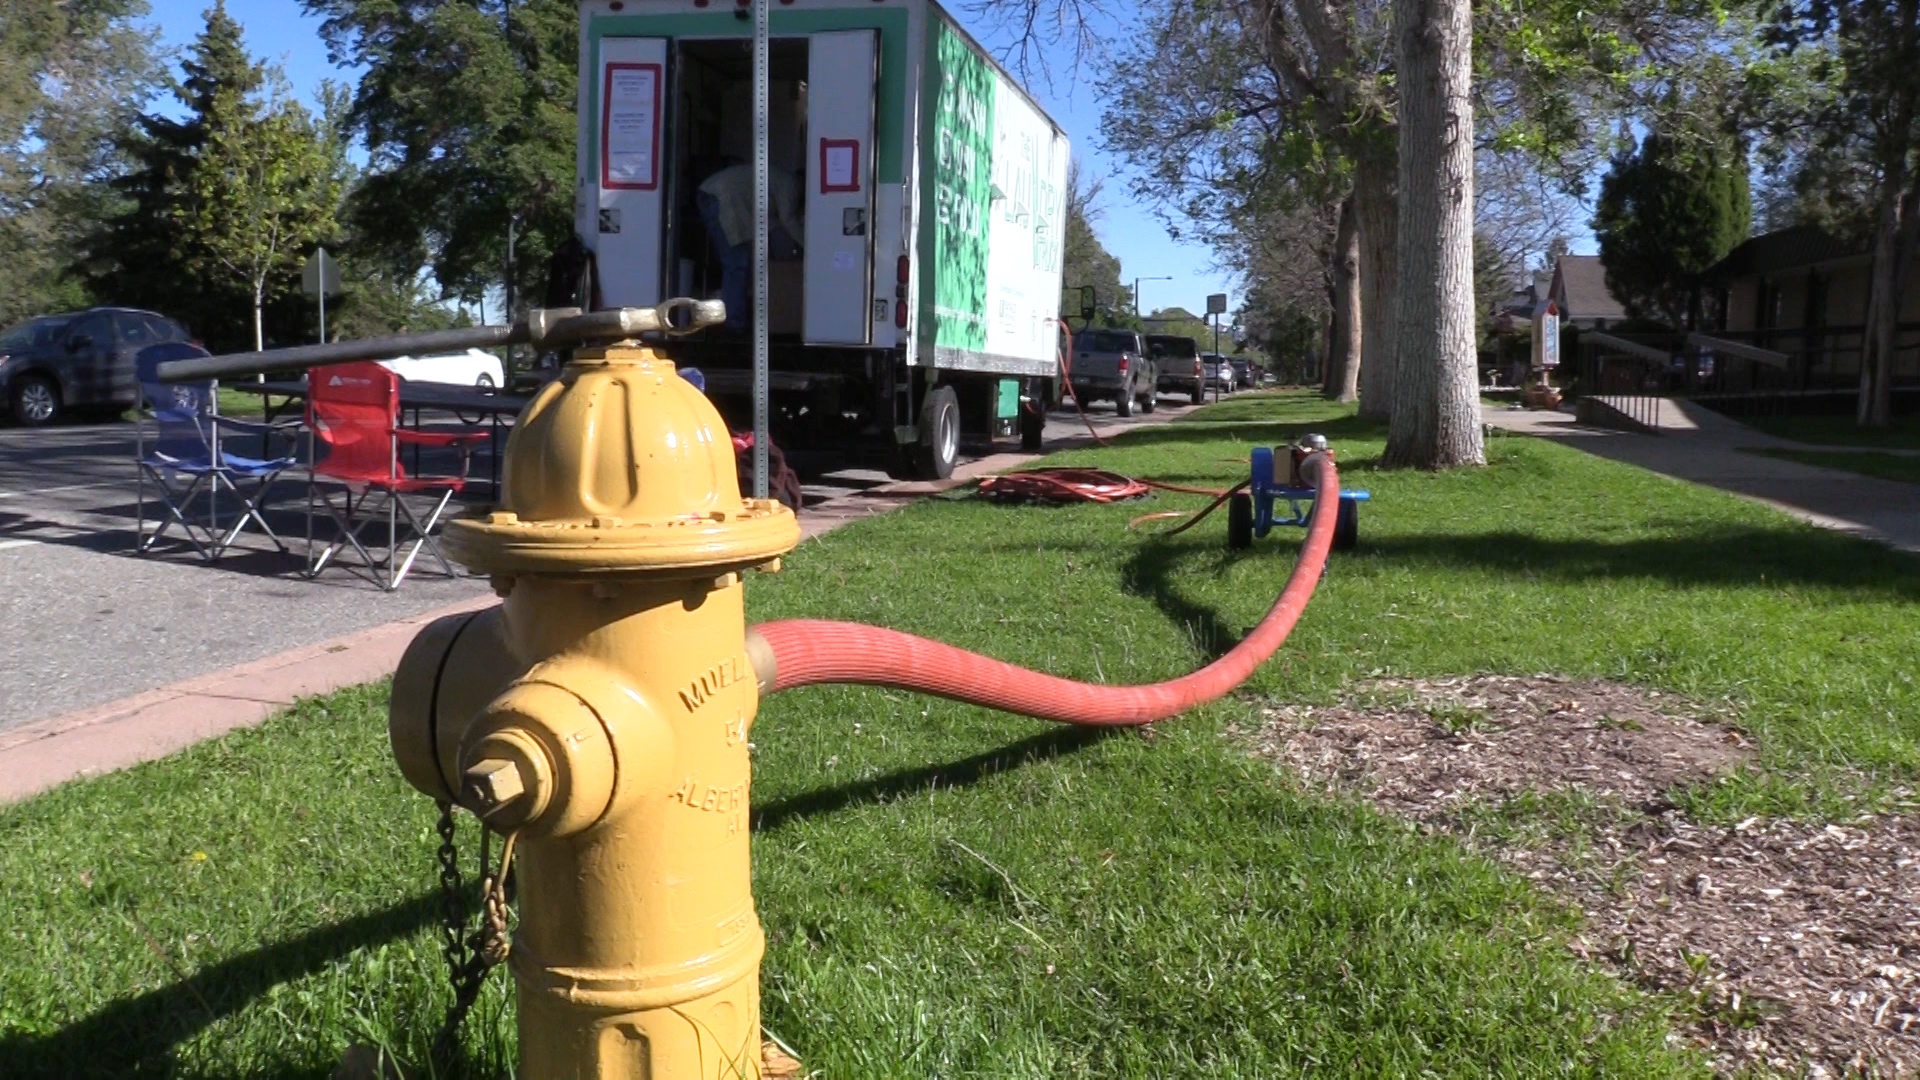 The Laundry Truck taps into fire hydrants to access water for its six washing machines.